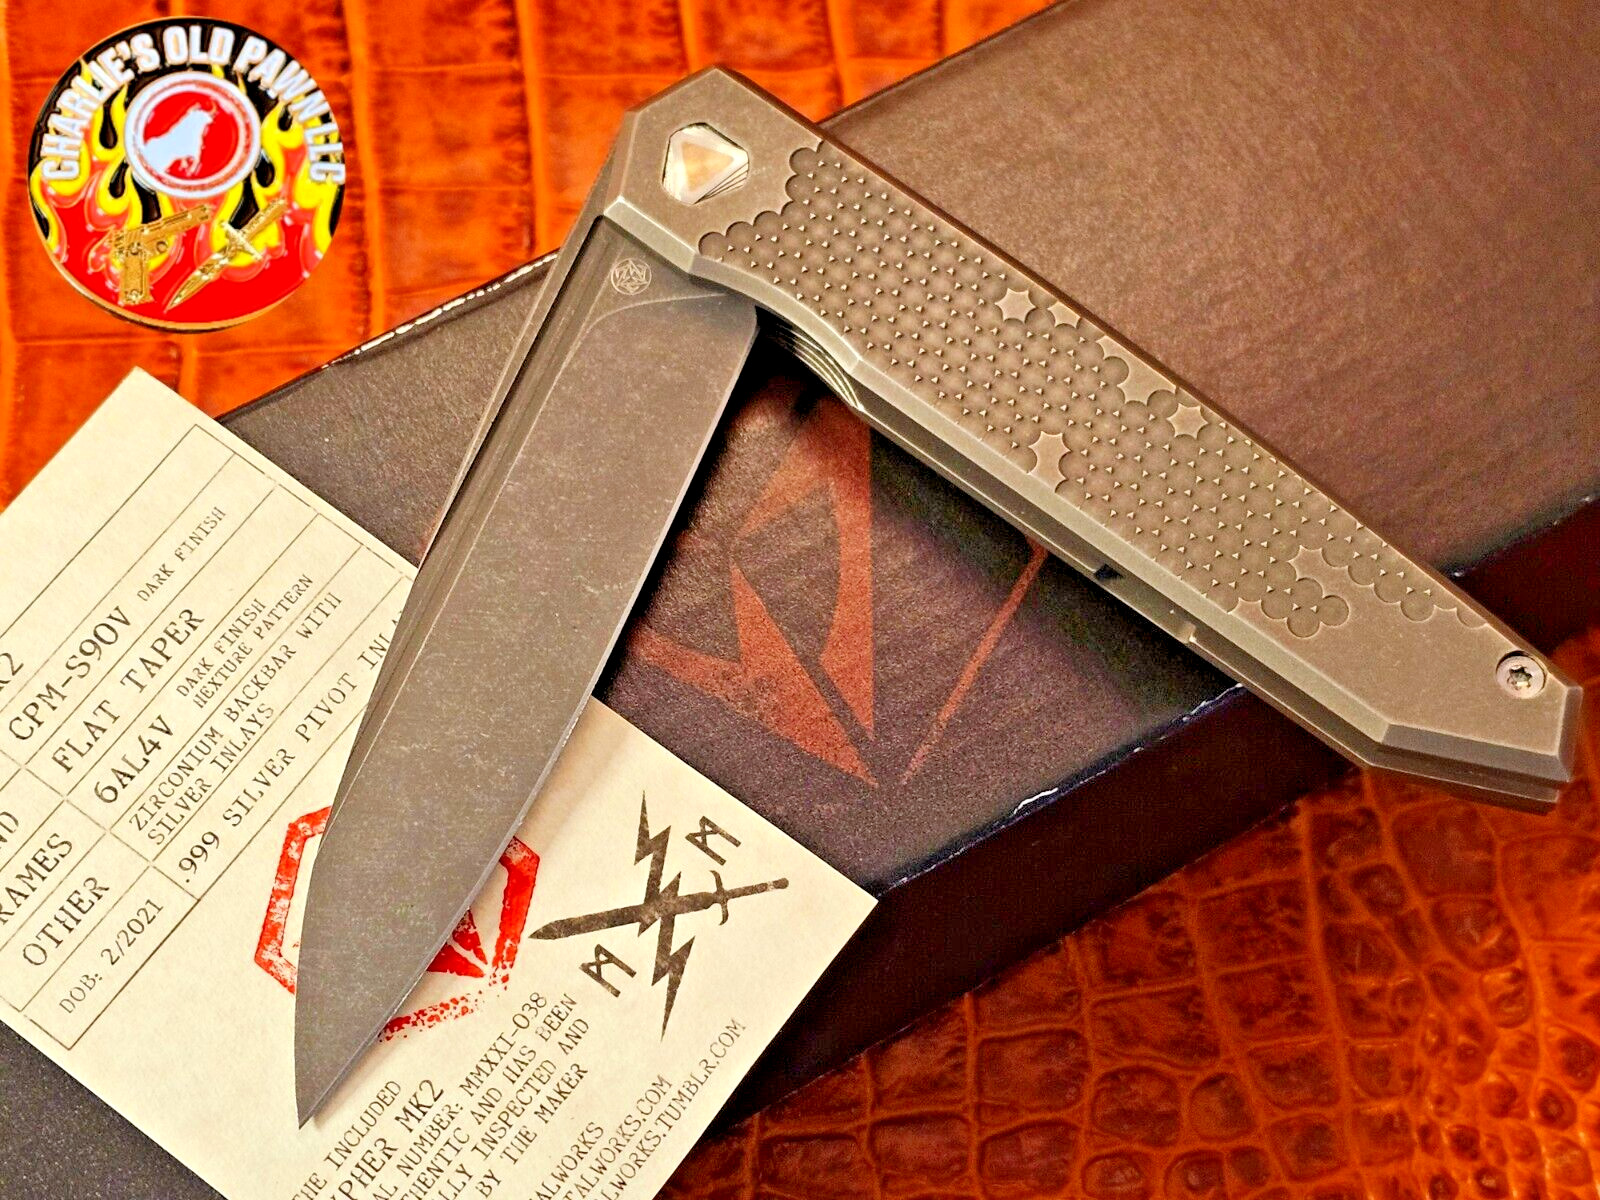 Very Rare Cypher MK2 by D.C. Munroe - Original Box - COA & Knife Tag from Maker